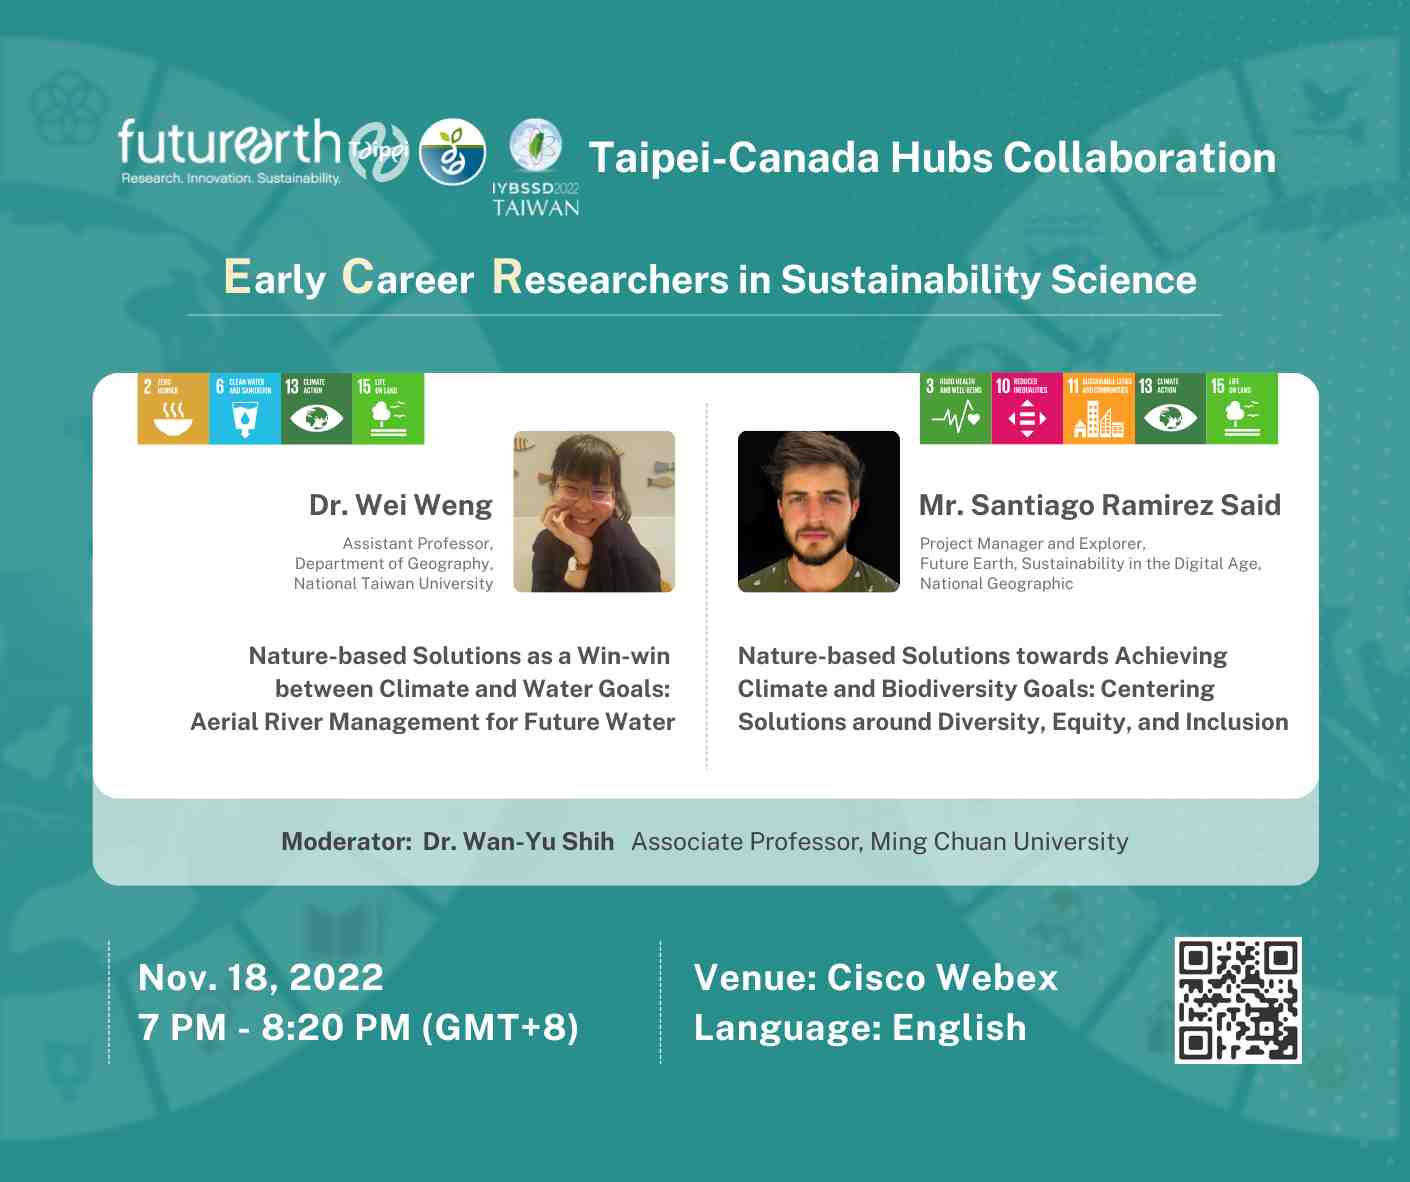 【Special Session ⭐️ 2022 ECRs in Sustainability Science 18】Taipei-Canada Hubs Collaboration: Nature-based solutions towards sustainability Promotional Graphics or Posters